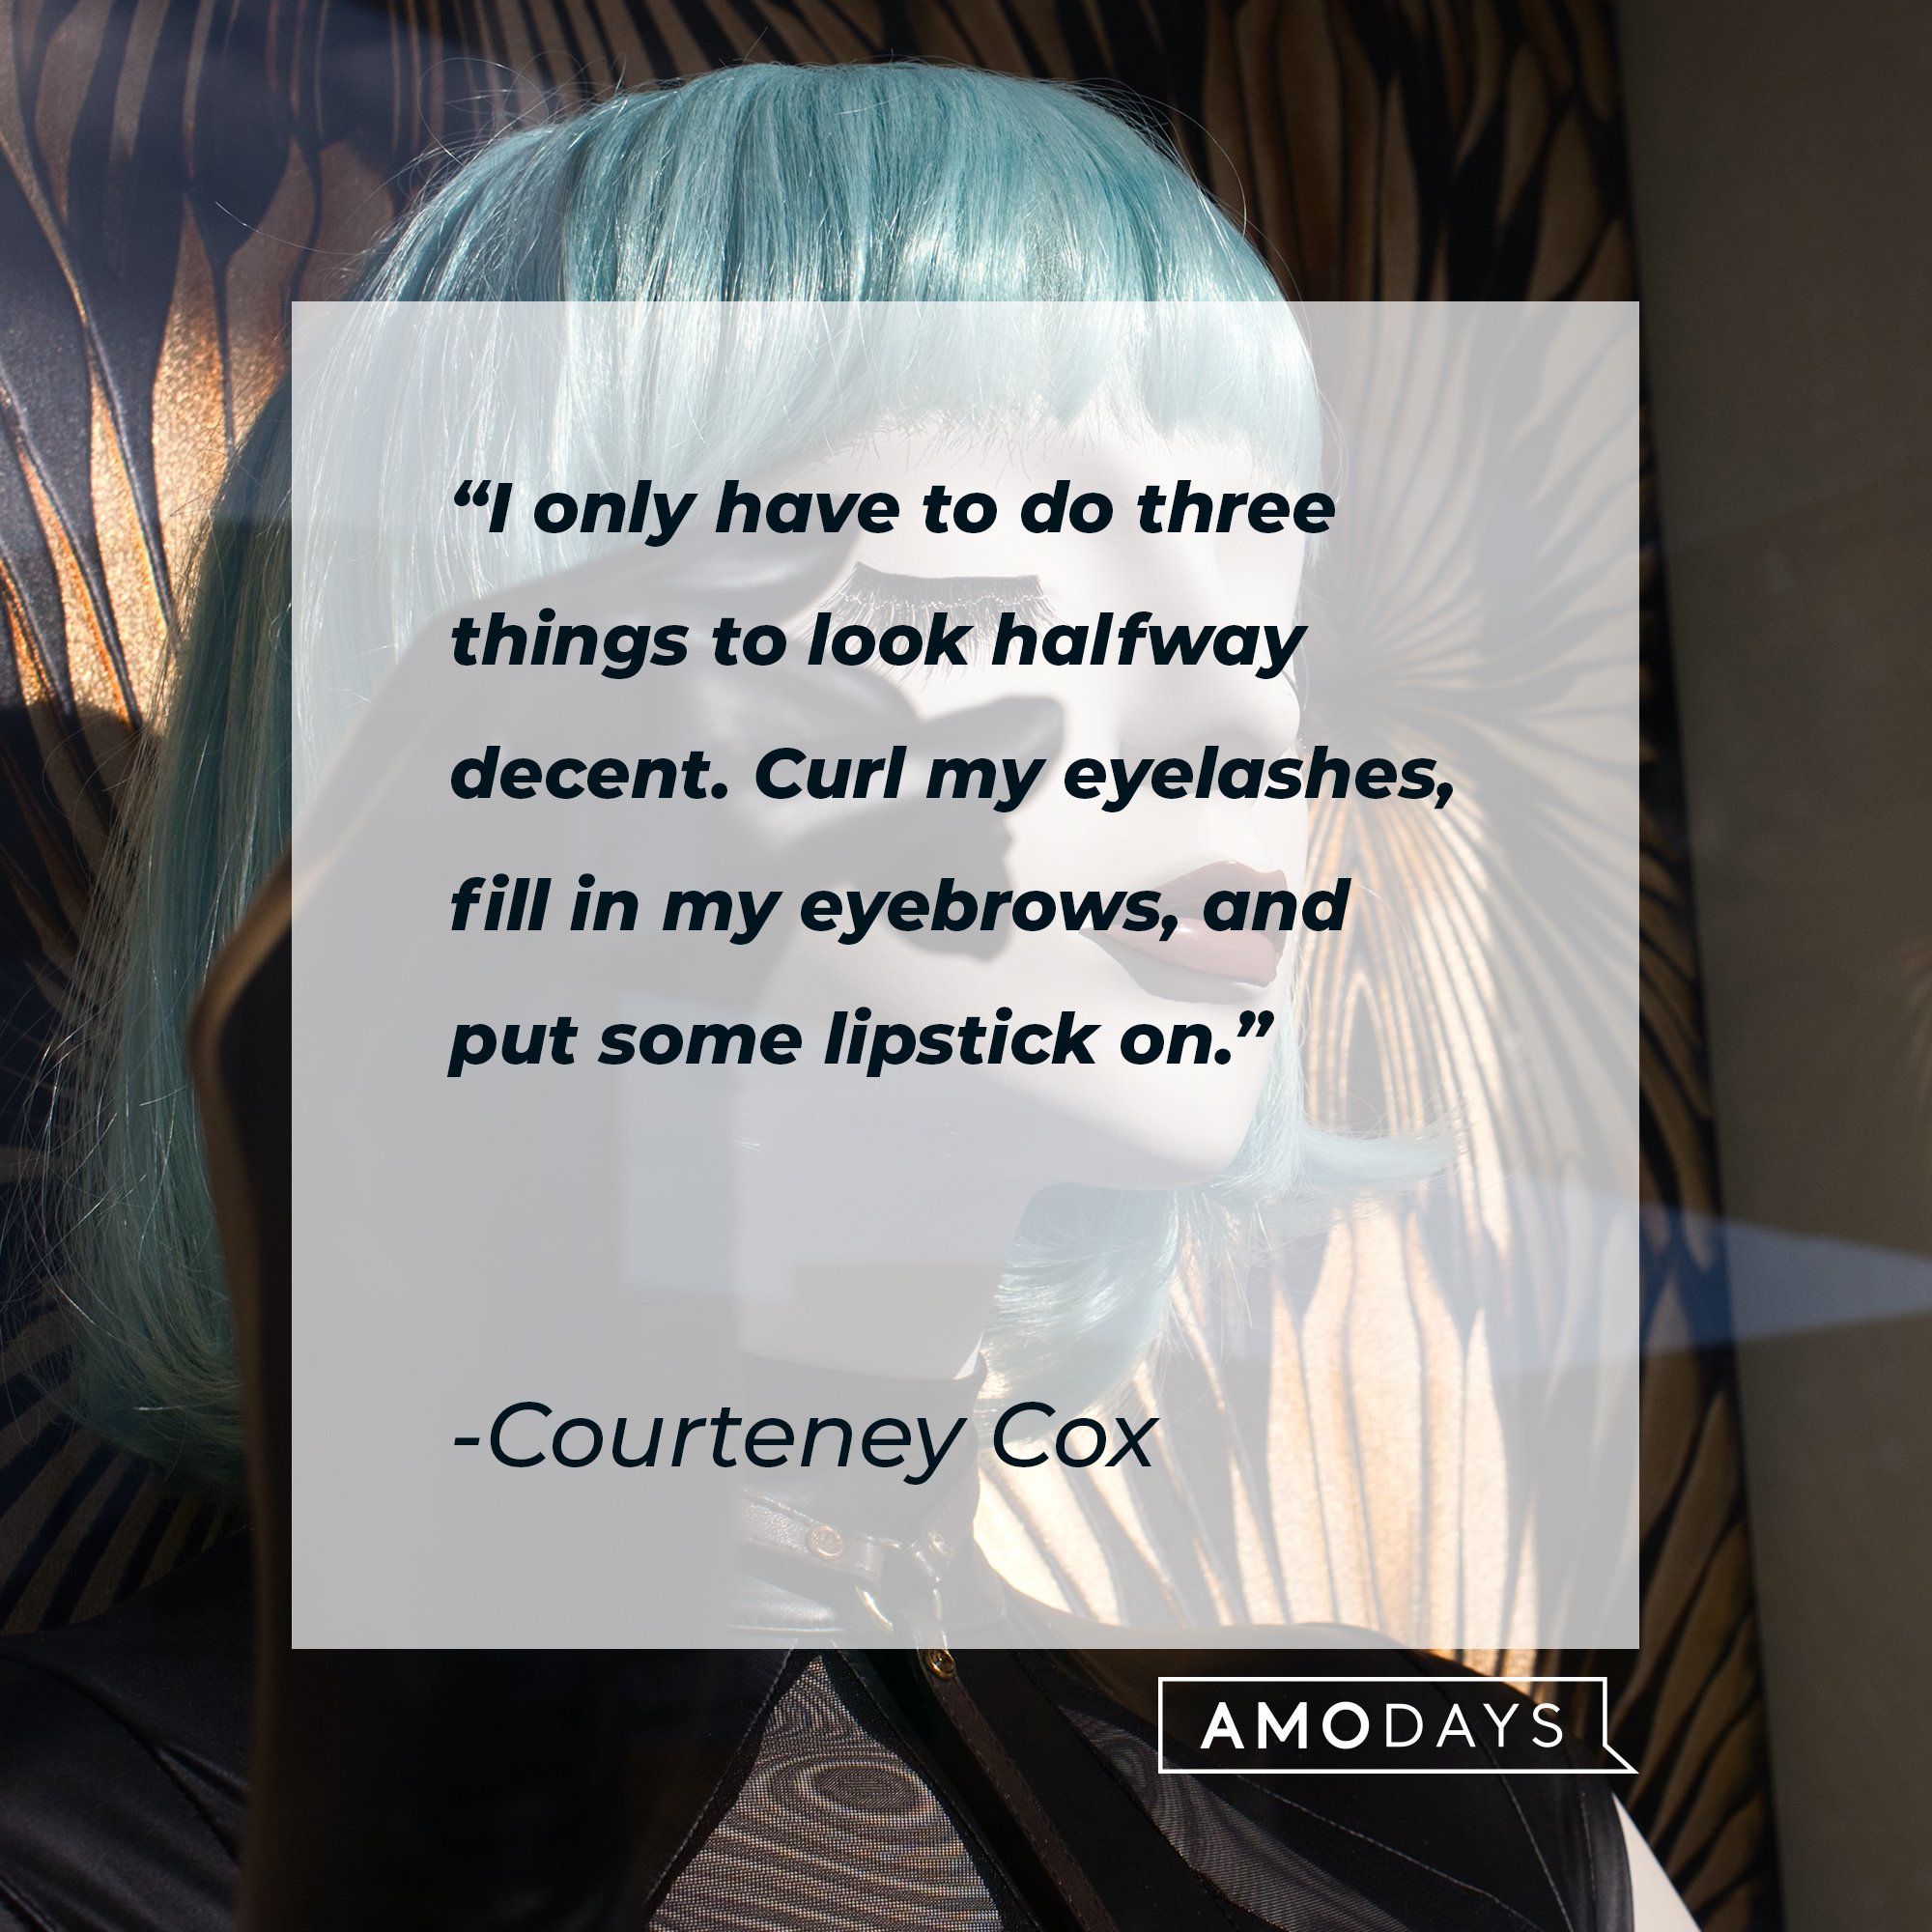 Courteney Cox’s quote: "I only have to do three things to look halfway decent. Curl my eyelashes, fill in my eyebrows, and put some lipstick on."  | Image: AmoDays